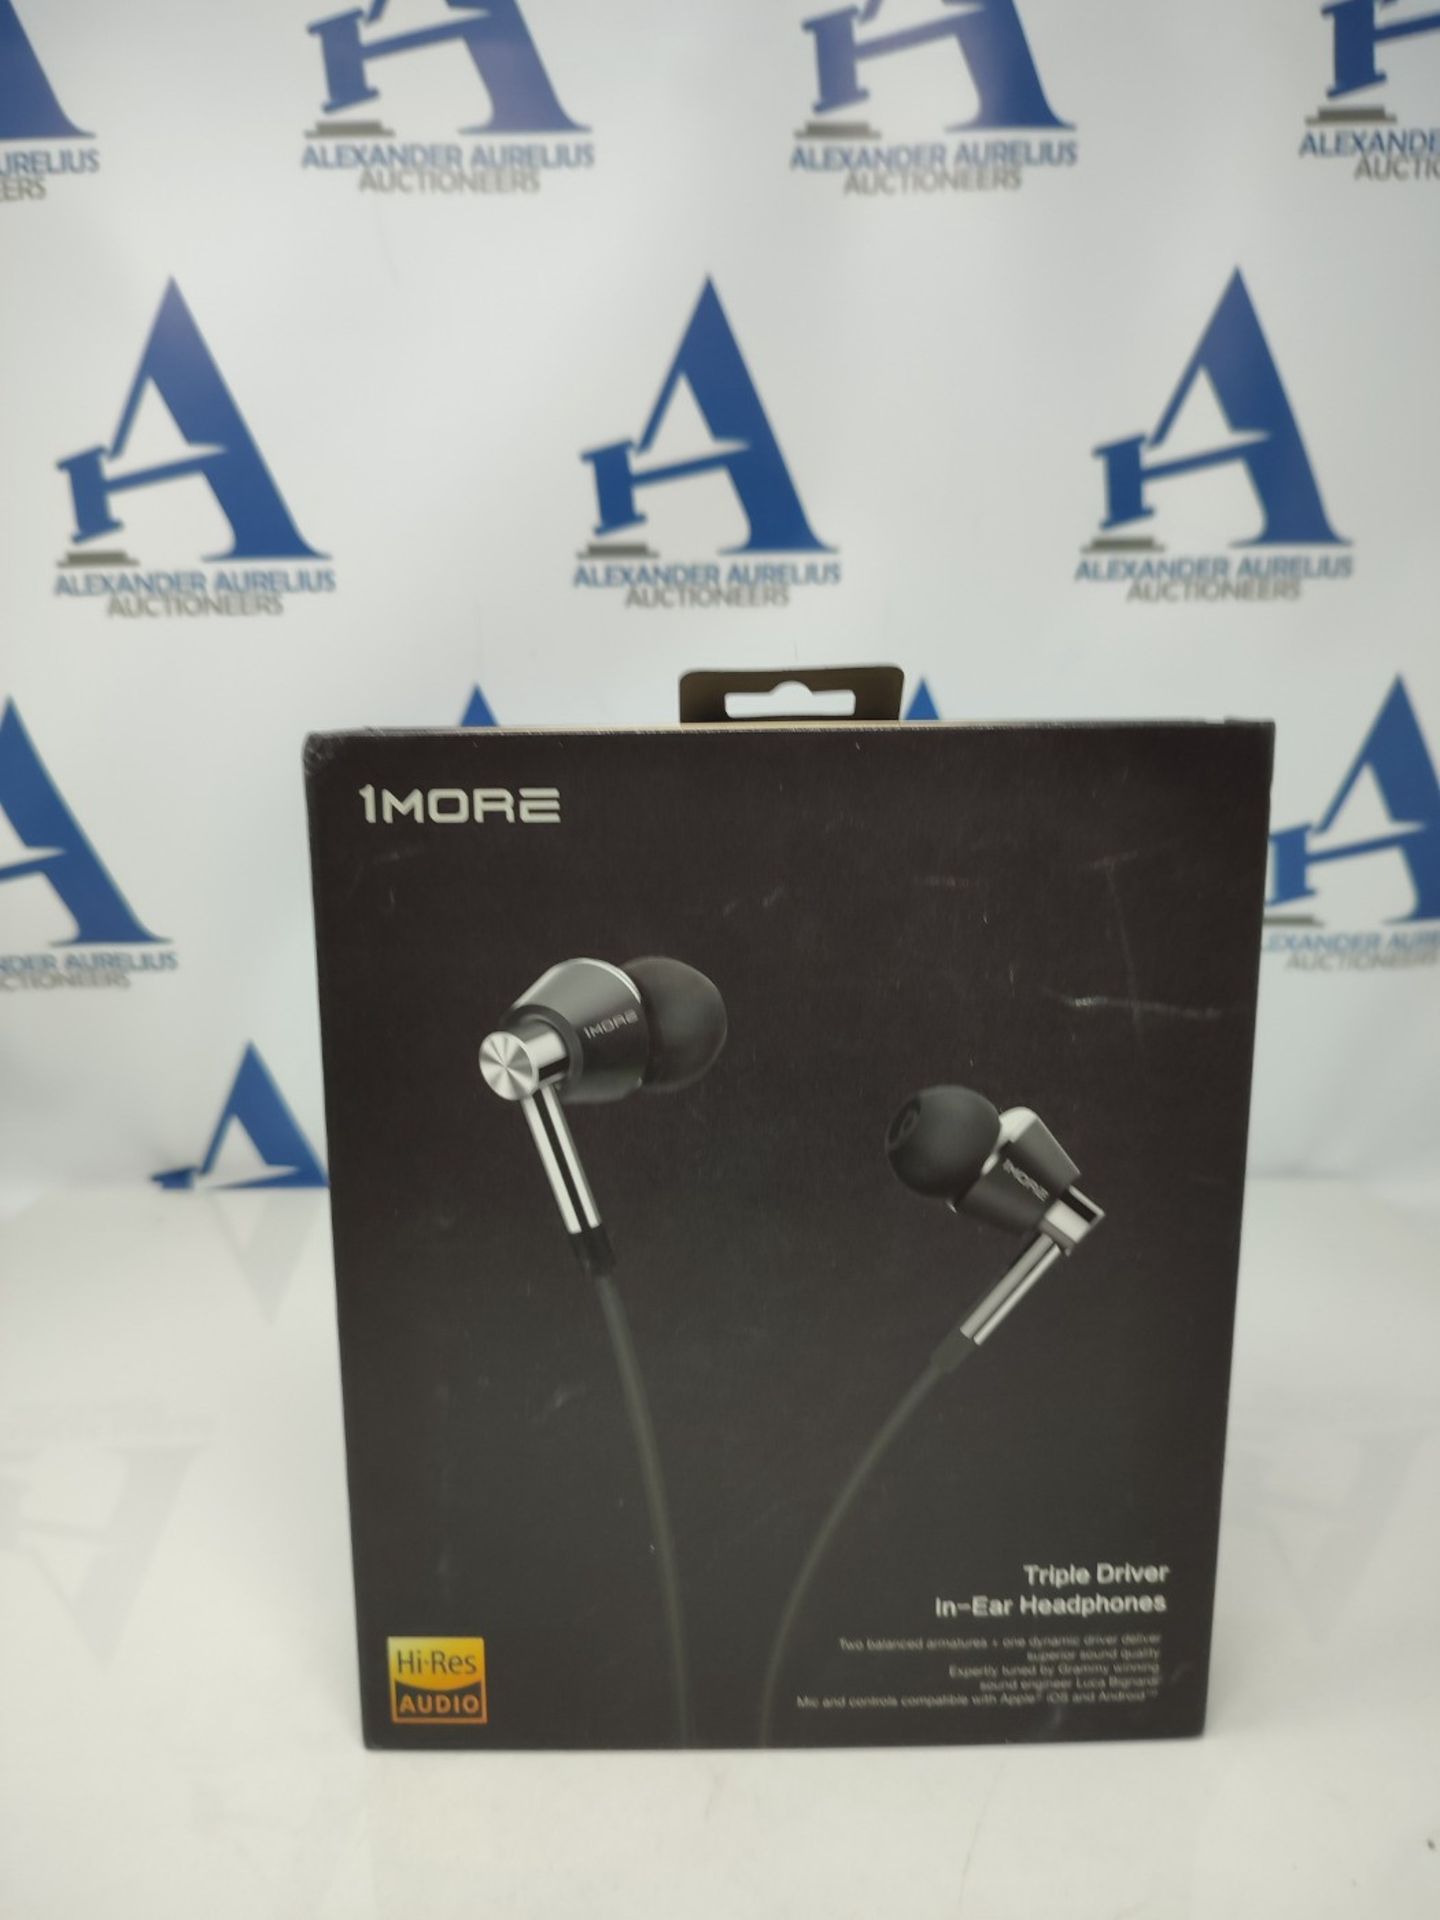 RRP £65.00 [INCOMPLETE] 1MORE Triple Driver Headphones, Wired In-Ear Hi-Fi Earphones with High Re - Bild 2 aus 3